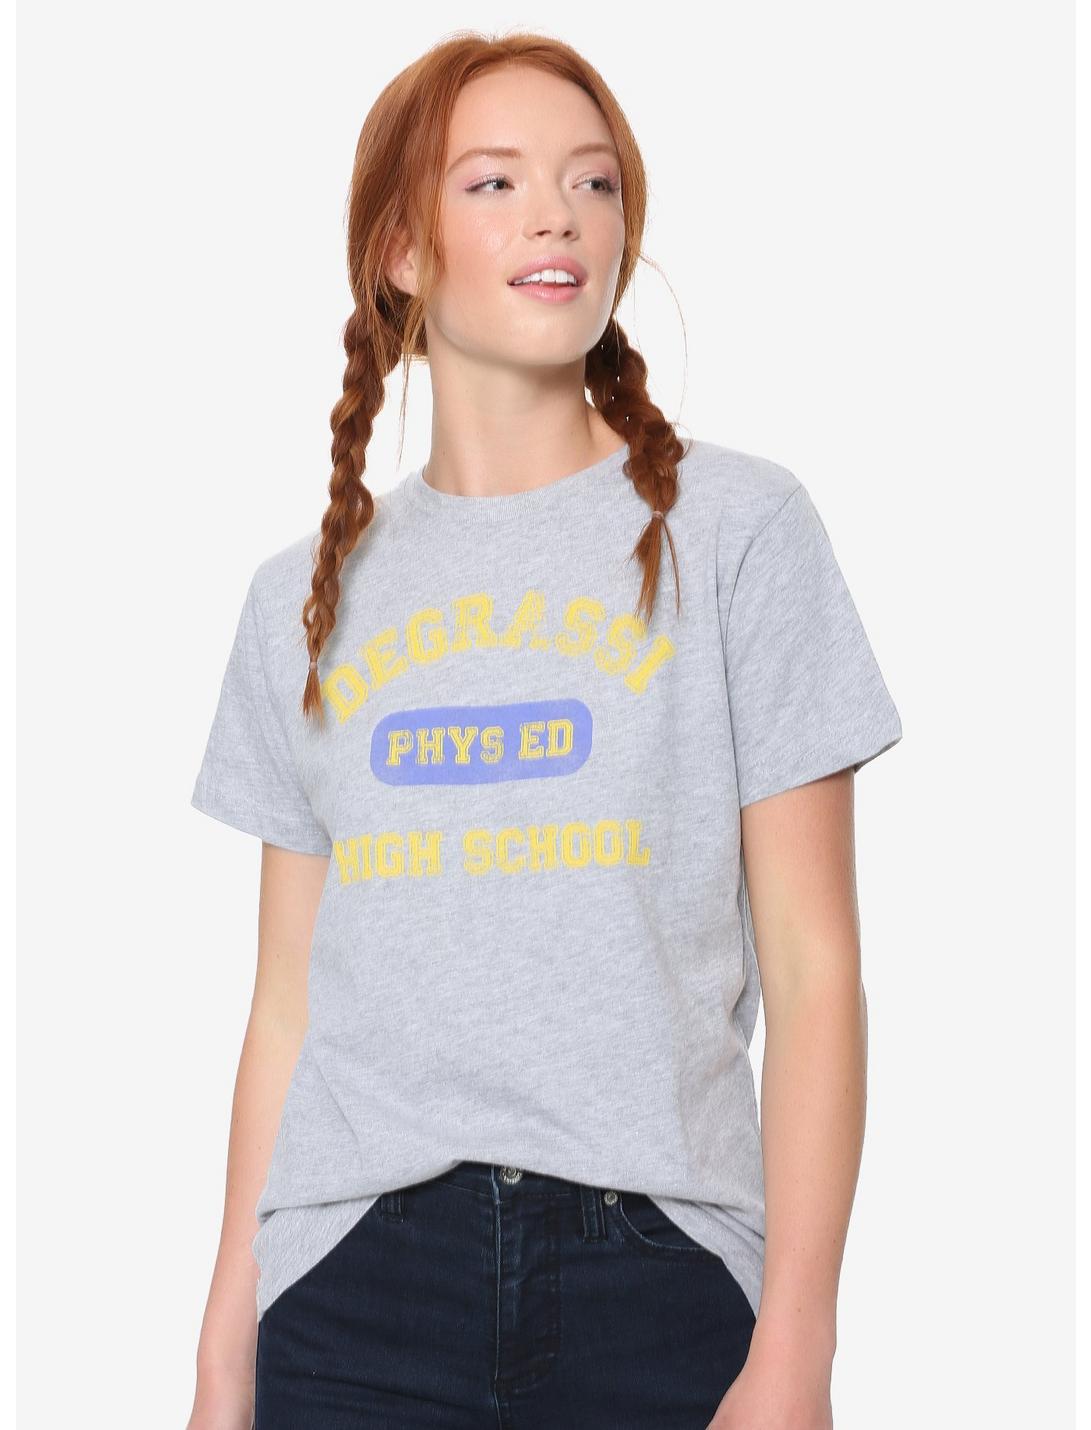 Degrassi: The Next Generation Phys Ed Womens Tee - BoxLunch Exclusive, GREY, hi-res